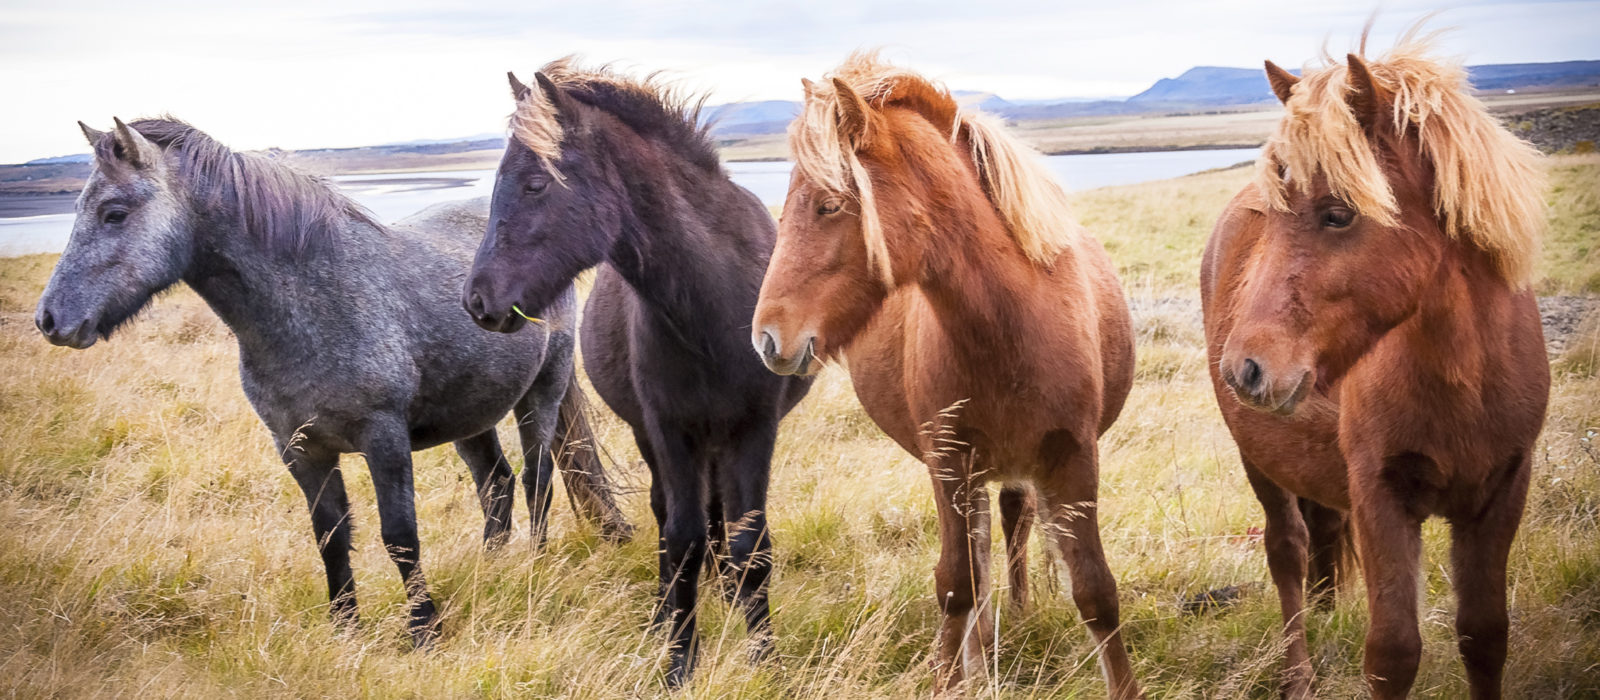 A Guide to Wildlife in Iceland | Jacada Travel